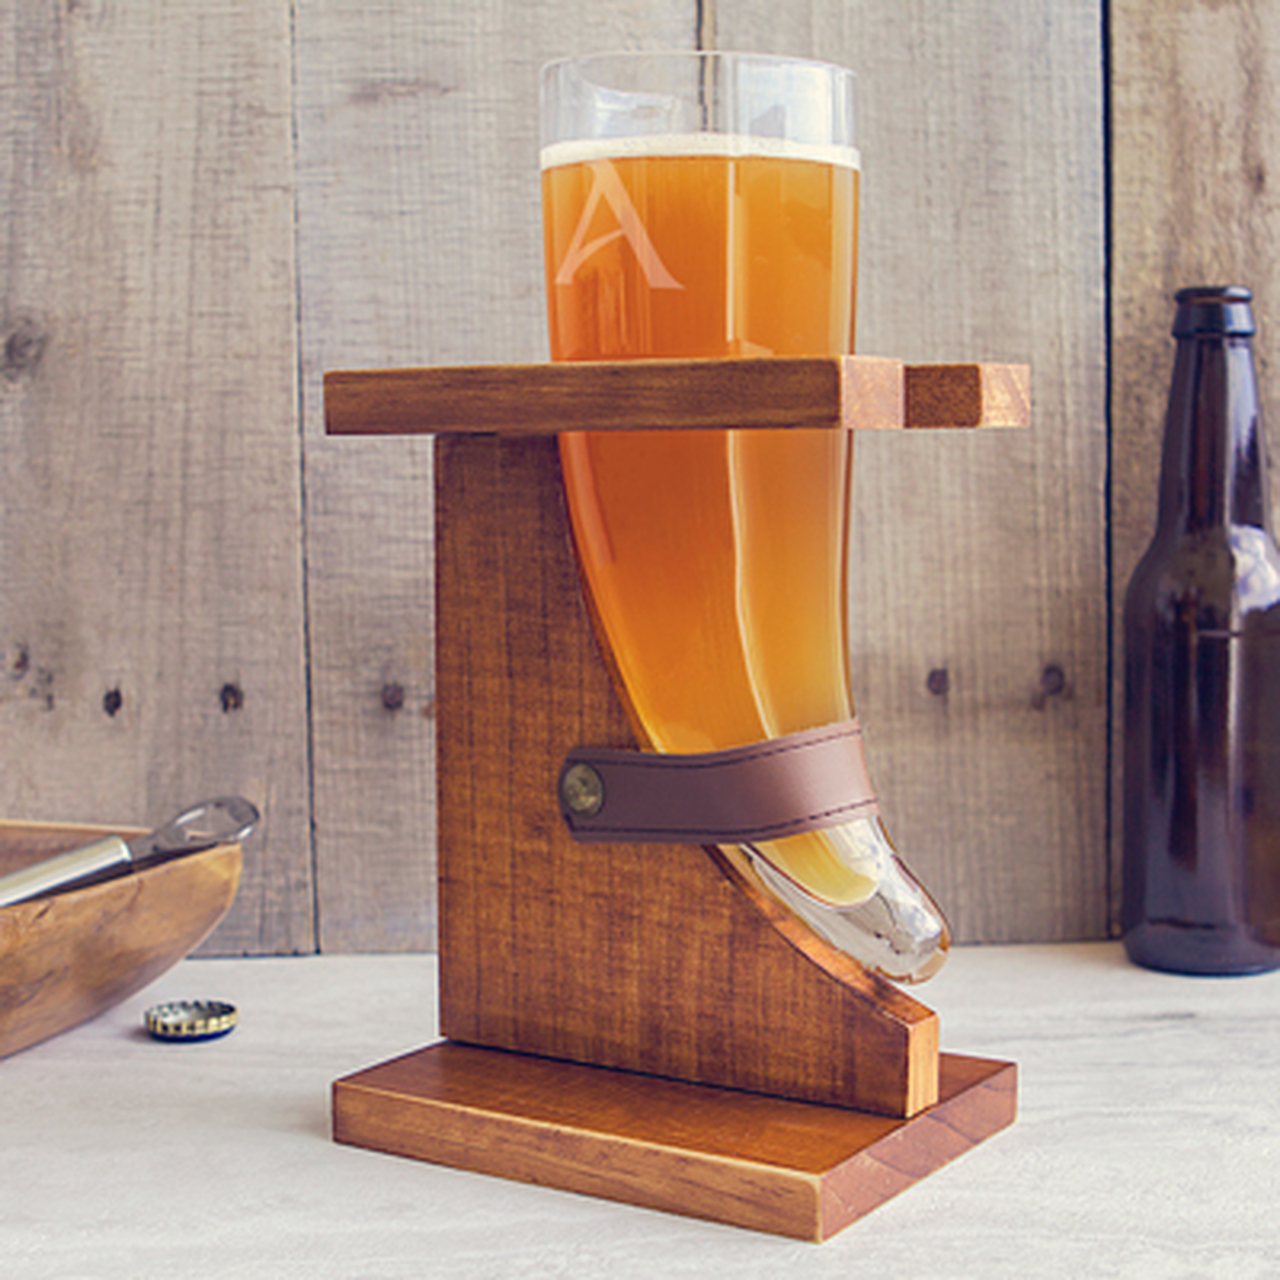 personalized-16oz-viking-beer-horn-glass-with-stand-details_01055_1513642798.jpg